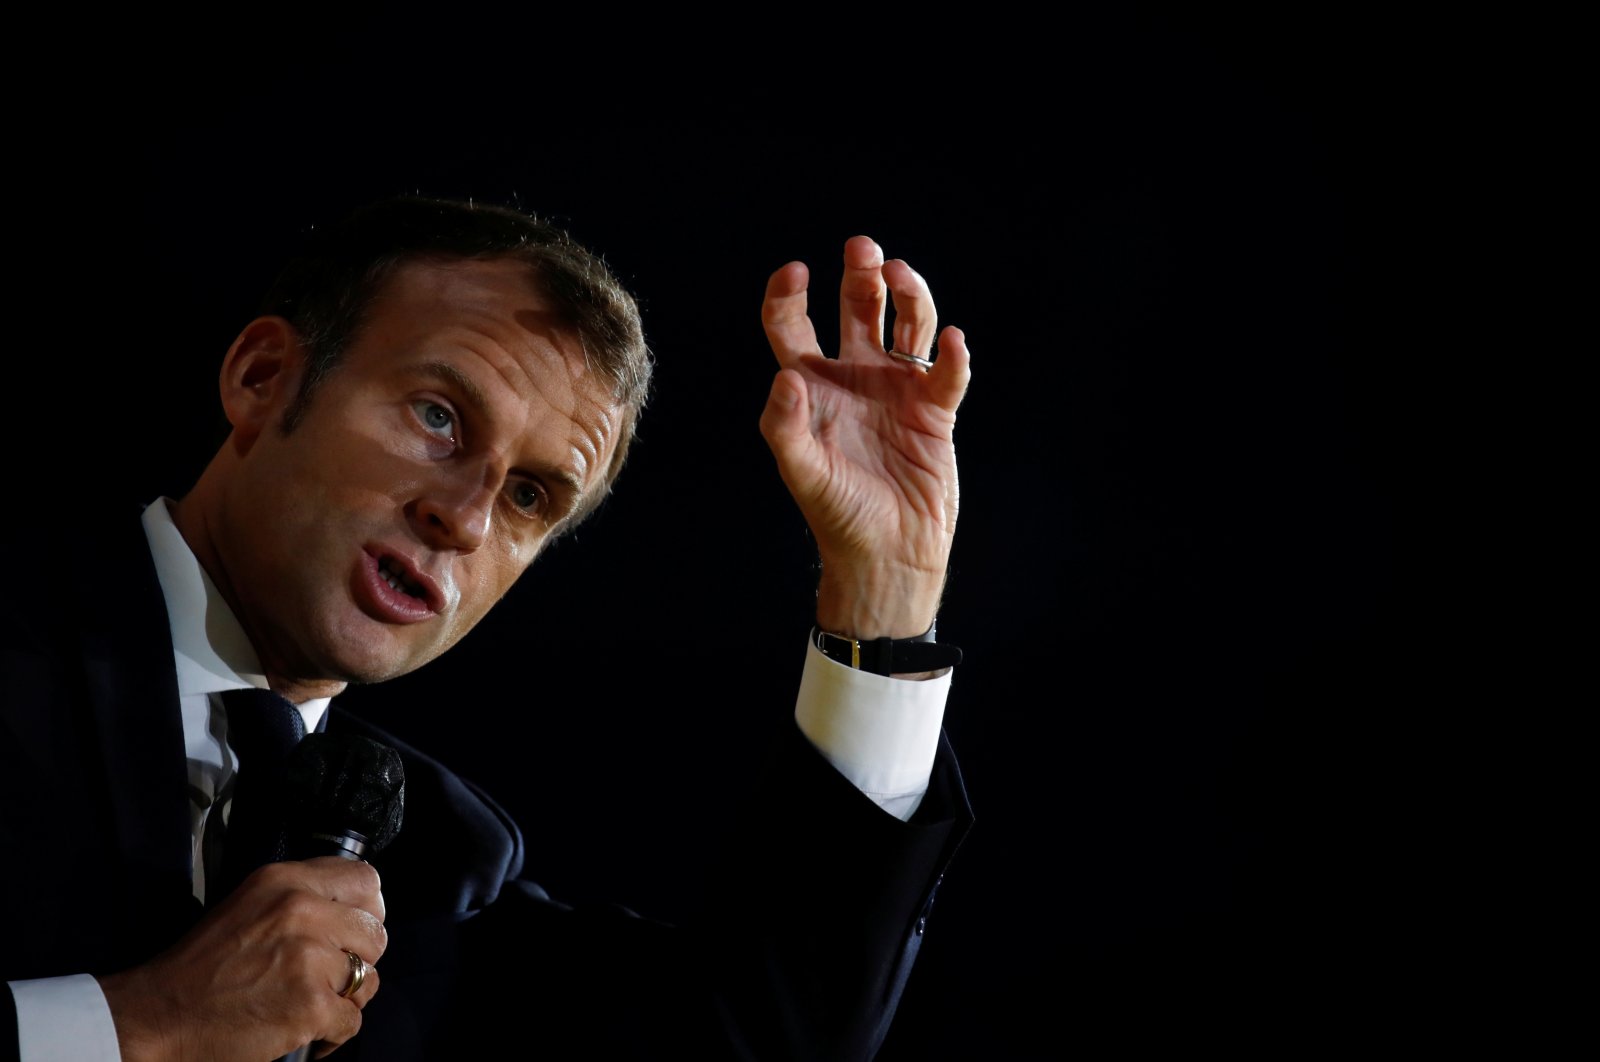 French President Emmanuel Macron gestures as he delivers a speech during the annual tech conference "Inno Generation"organized by French investment bank Bpifrance in Paris, France, Oct. 1, 2020. (Reuters Photo)